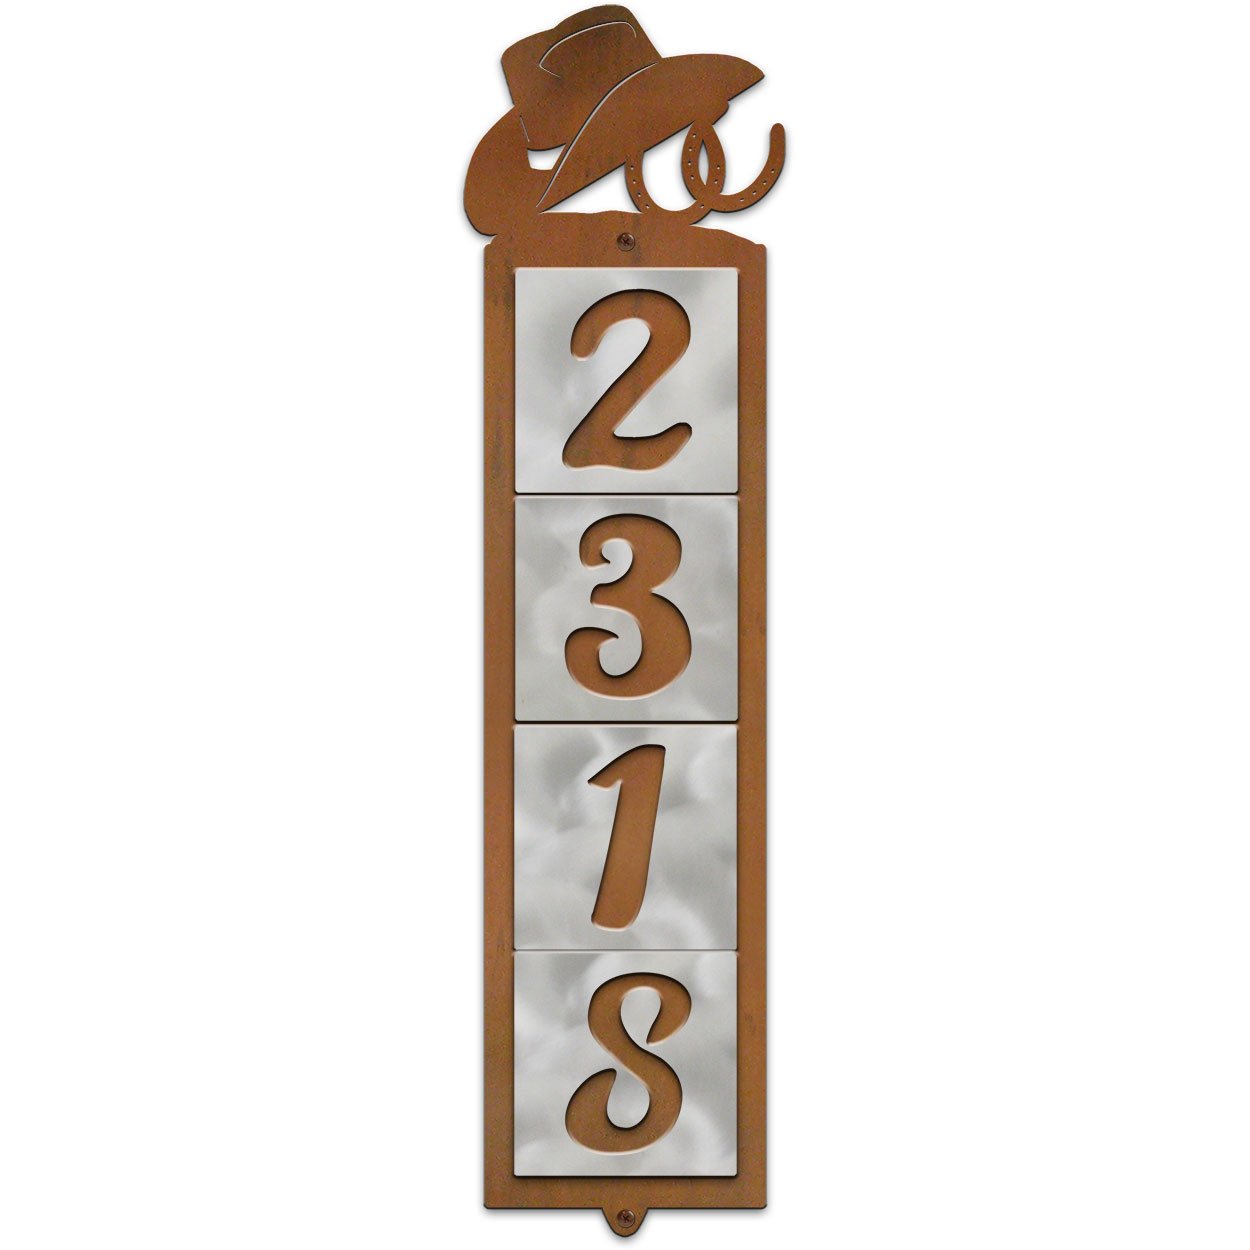 605334 - Hat and Horseshoes Metal Tile 4-Digit Vertical House Numbers